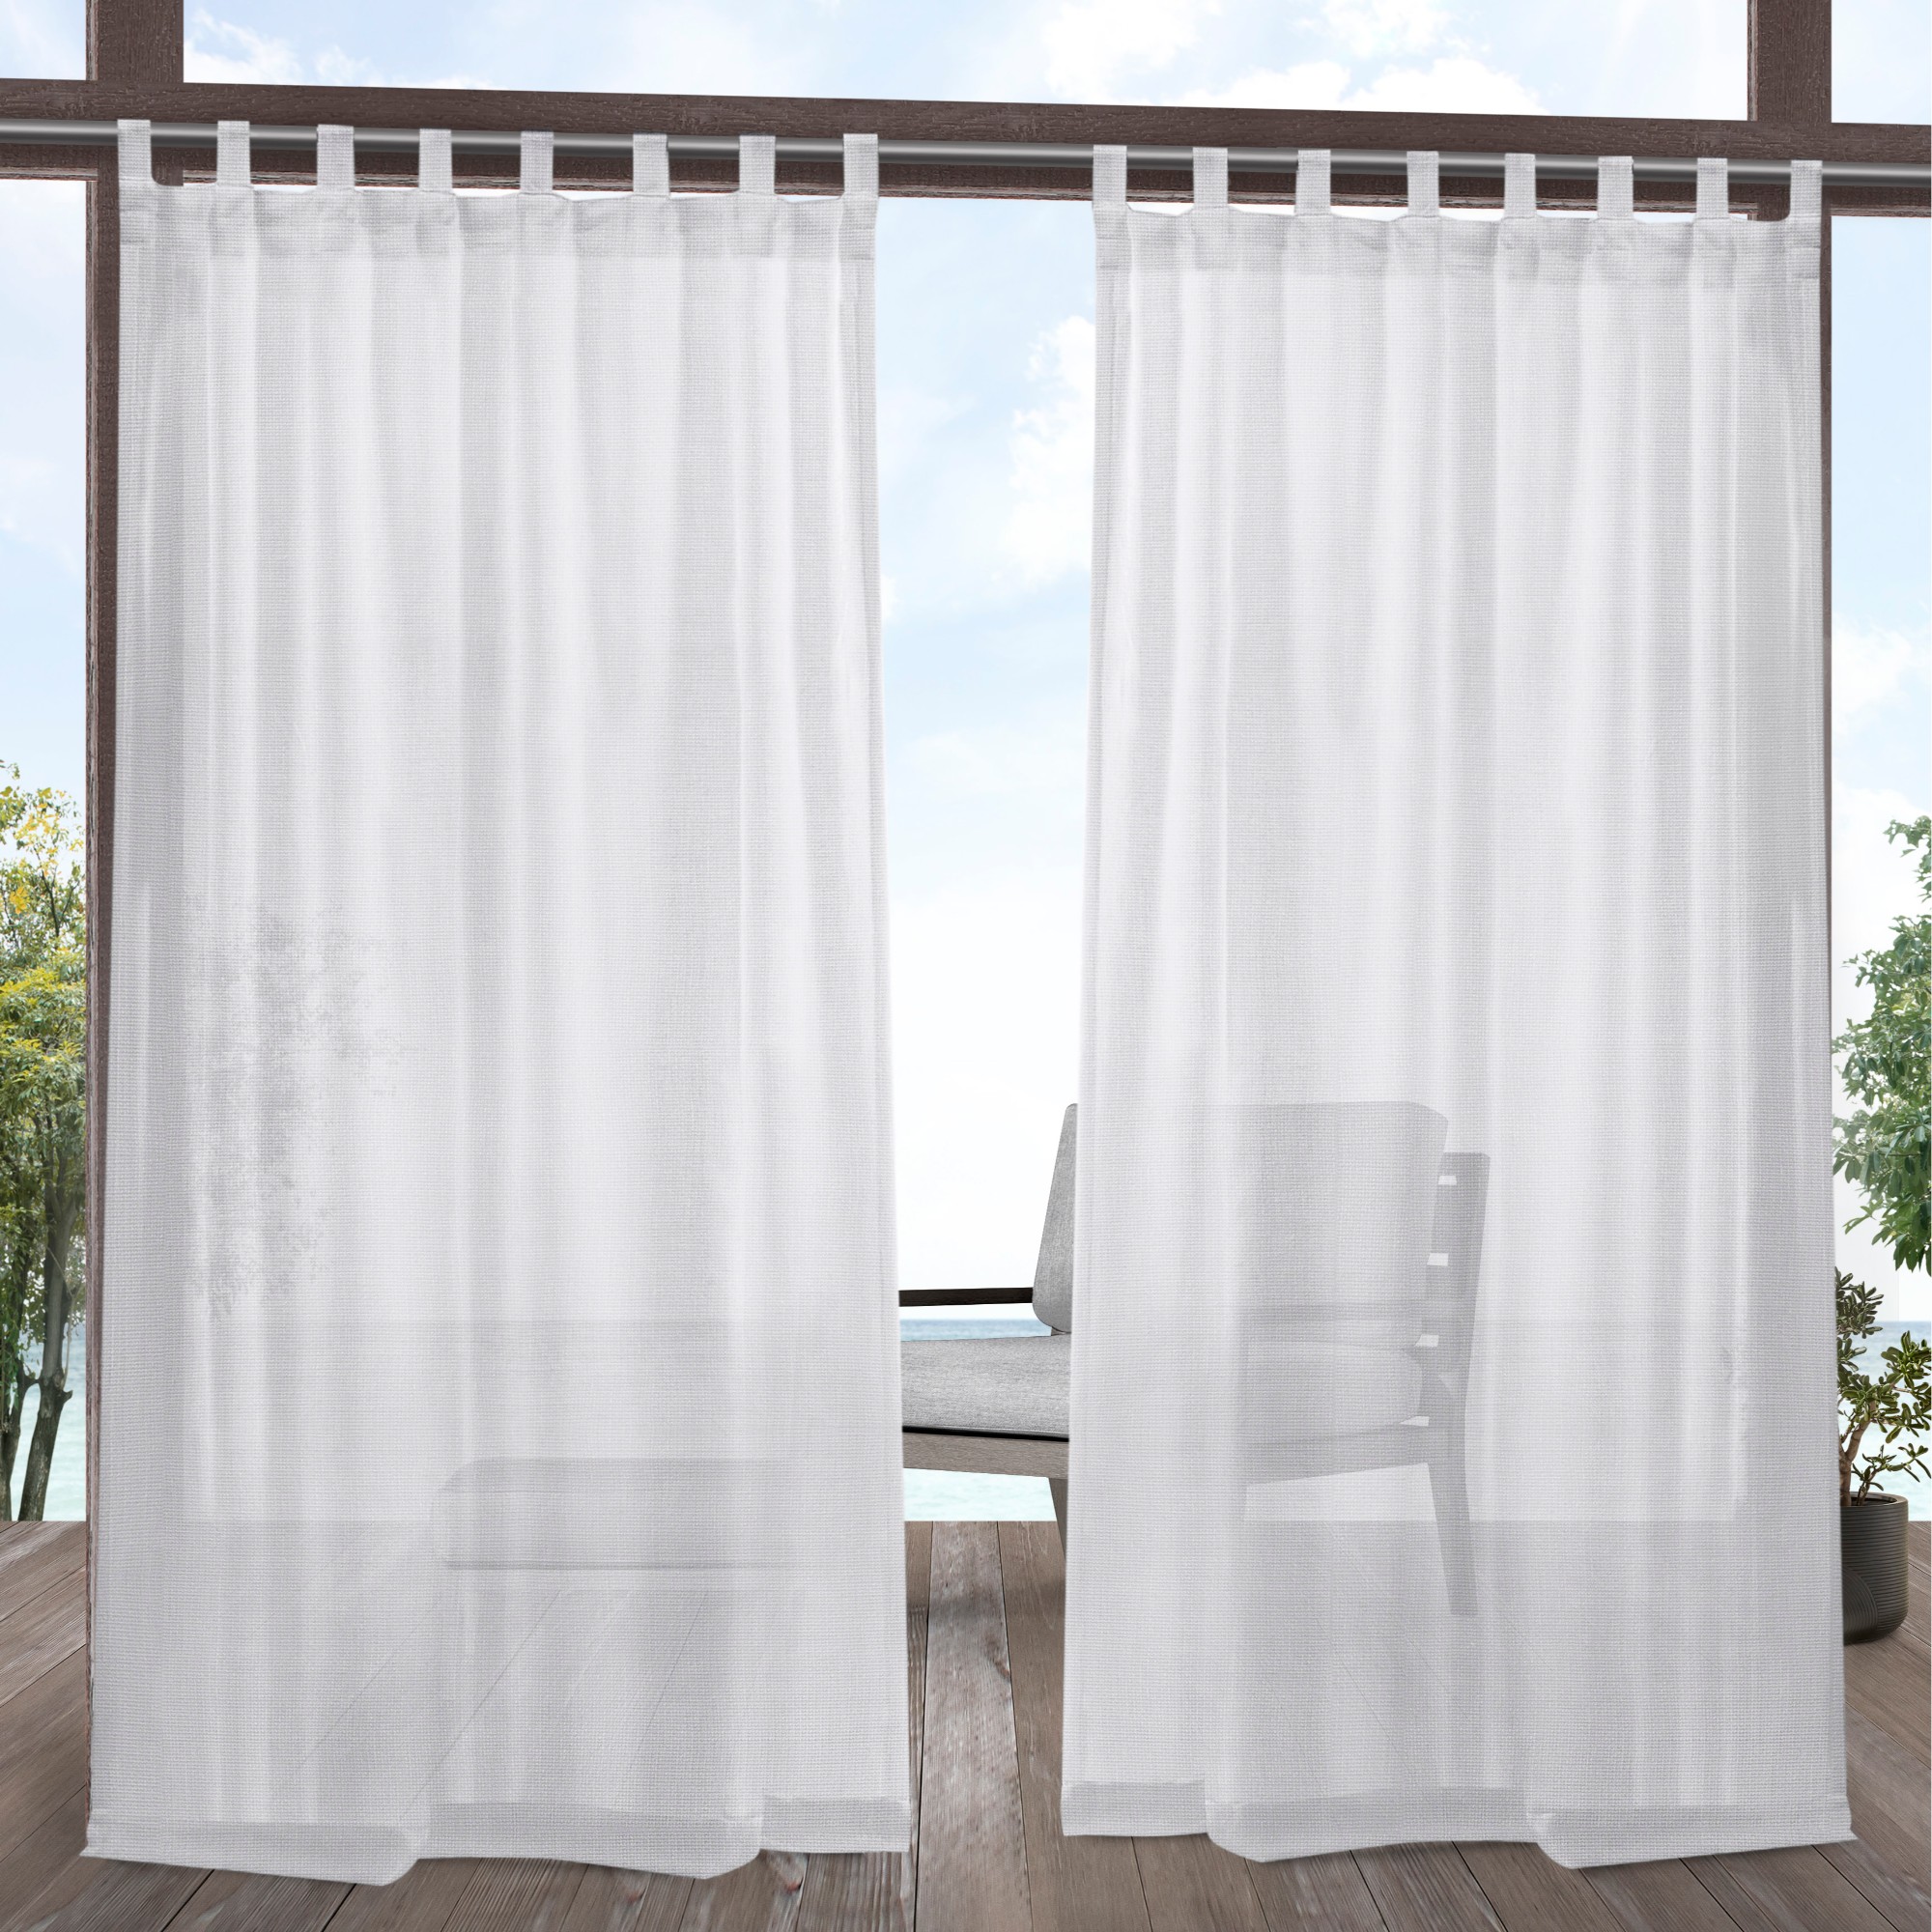 Exclusive Home Miami Semi-Sheer Indoor/Outdoor Hook-and-Loop Tab Top Curtain Panel Pair, 54"x96", Winter White - image 1 of 6